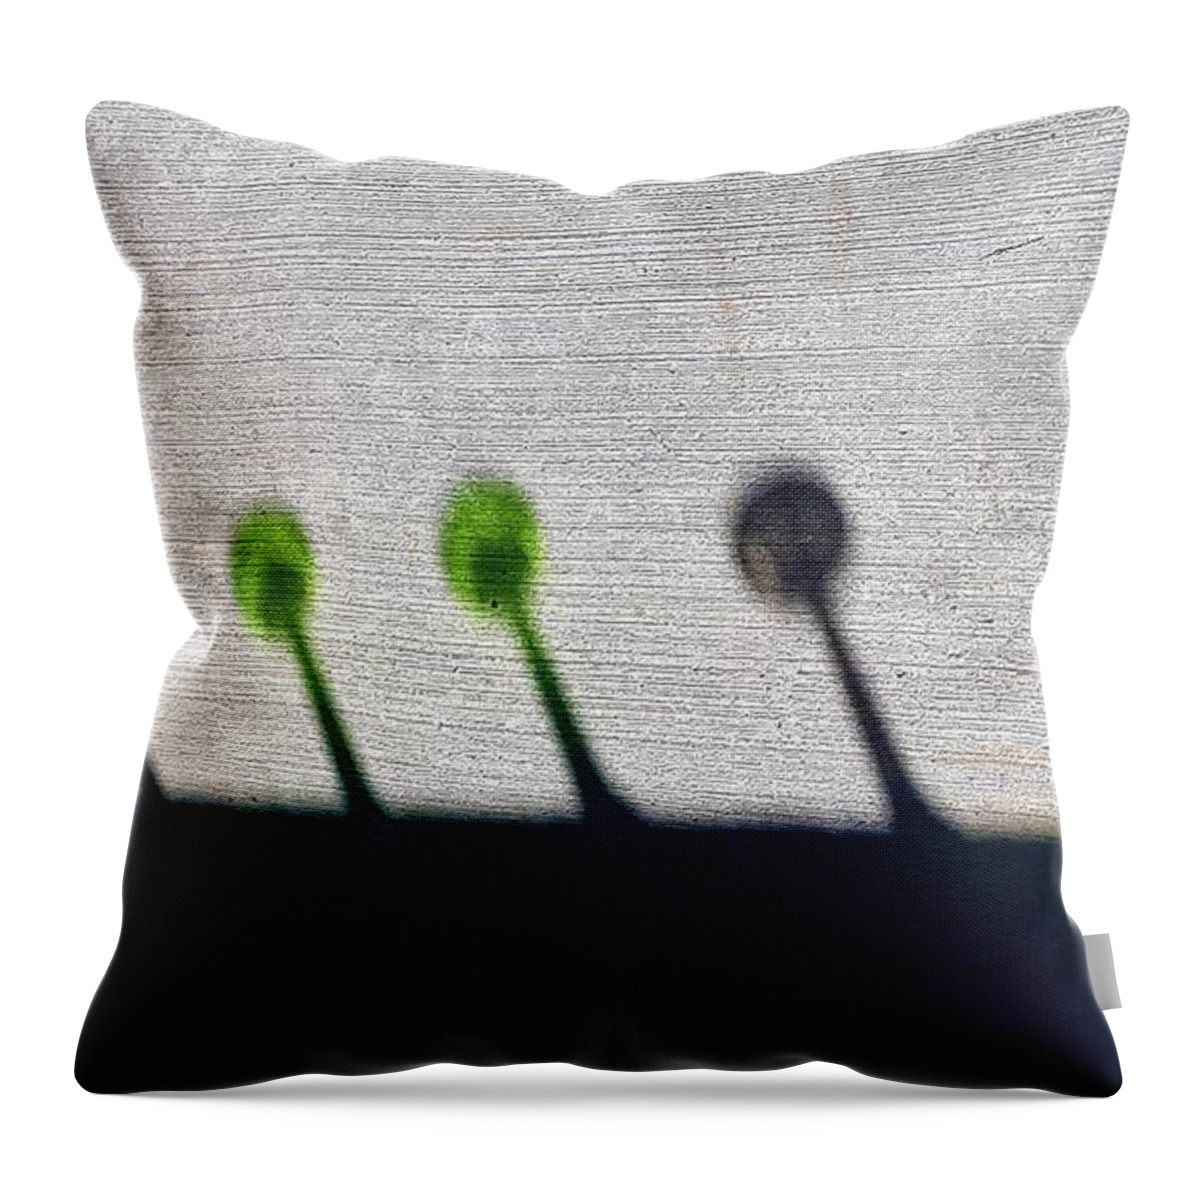 Shadows Throw Pillow featuring the photograph Attention Cups 2 by Rob Hans